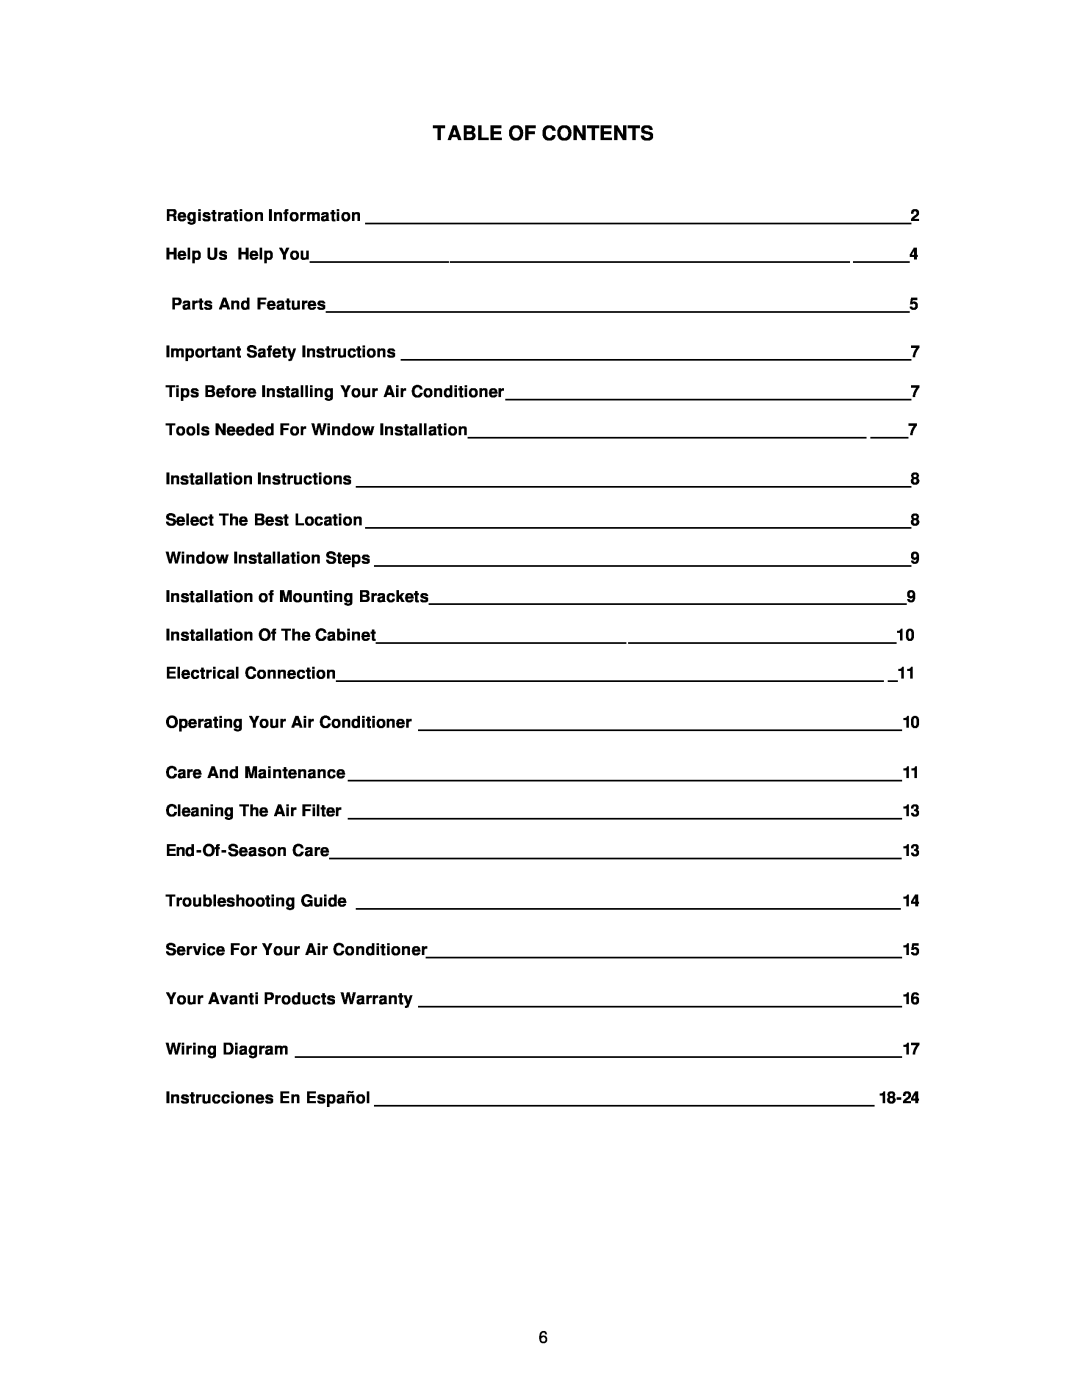 Avanti Air Conditioner instruction manual Table Of Contents 